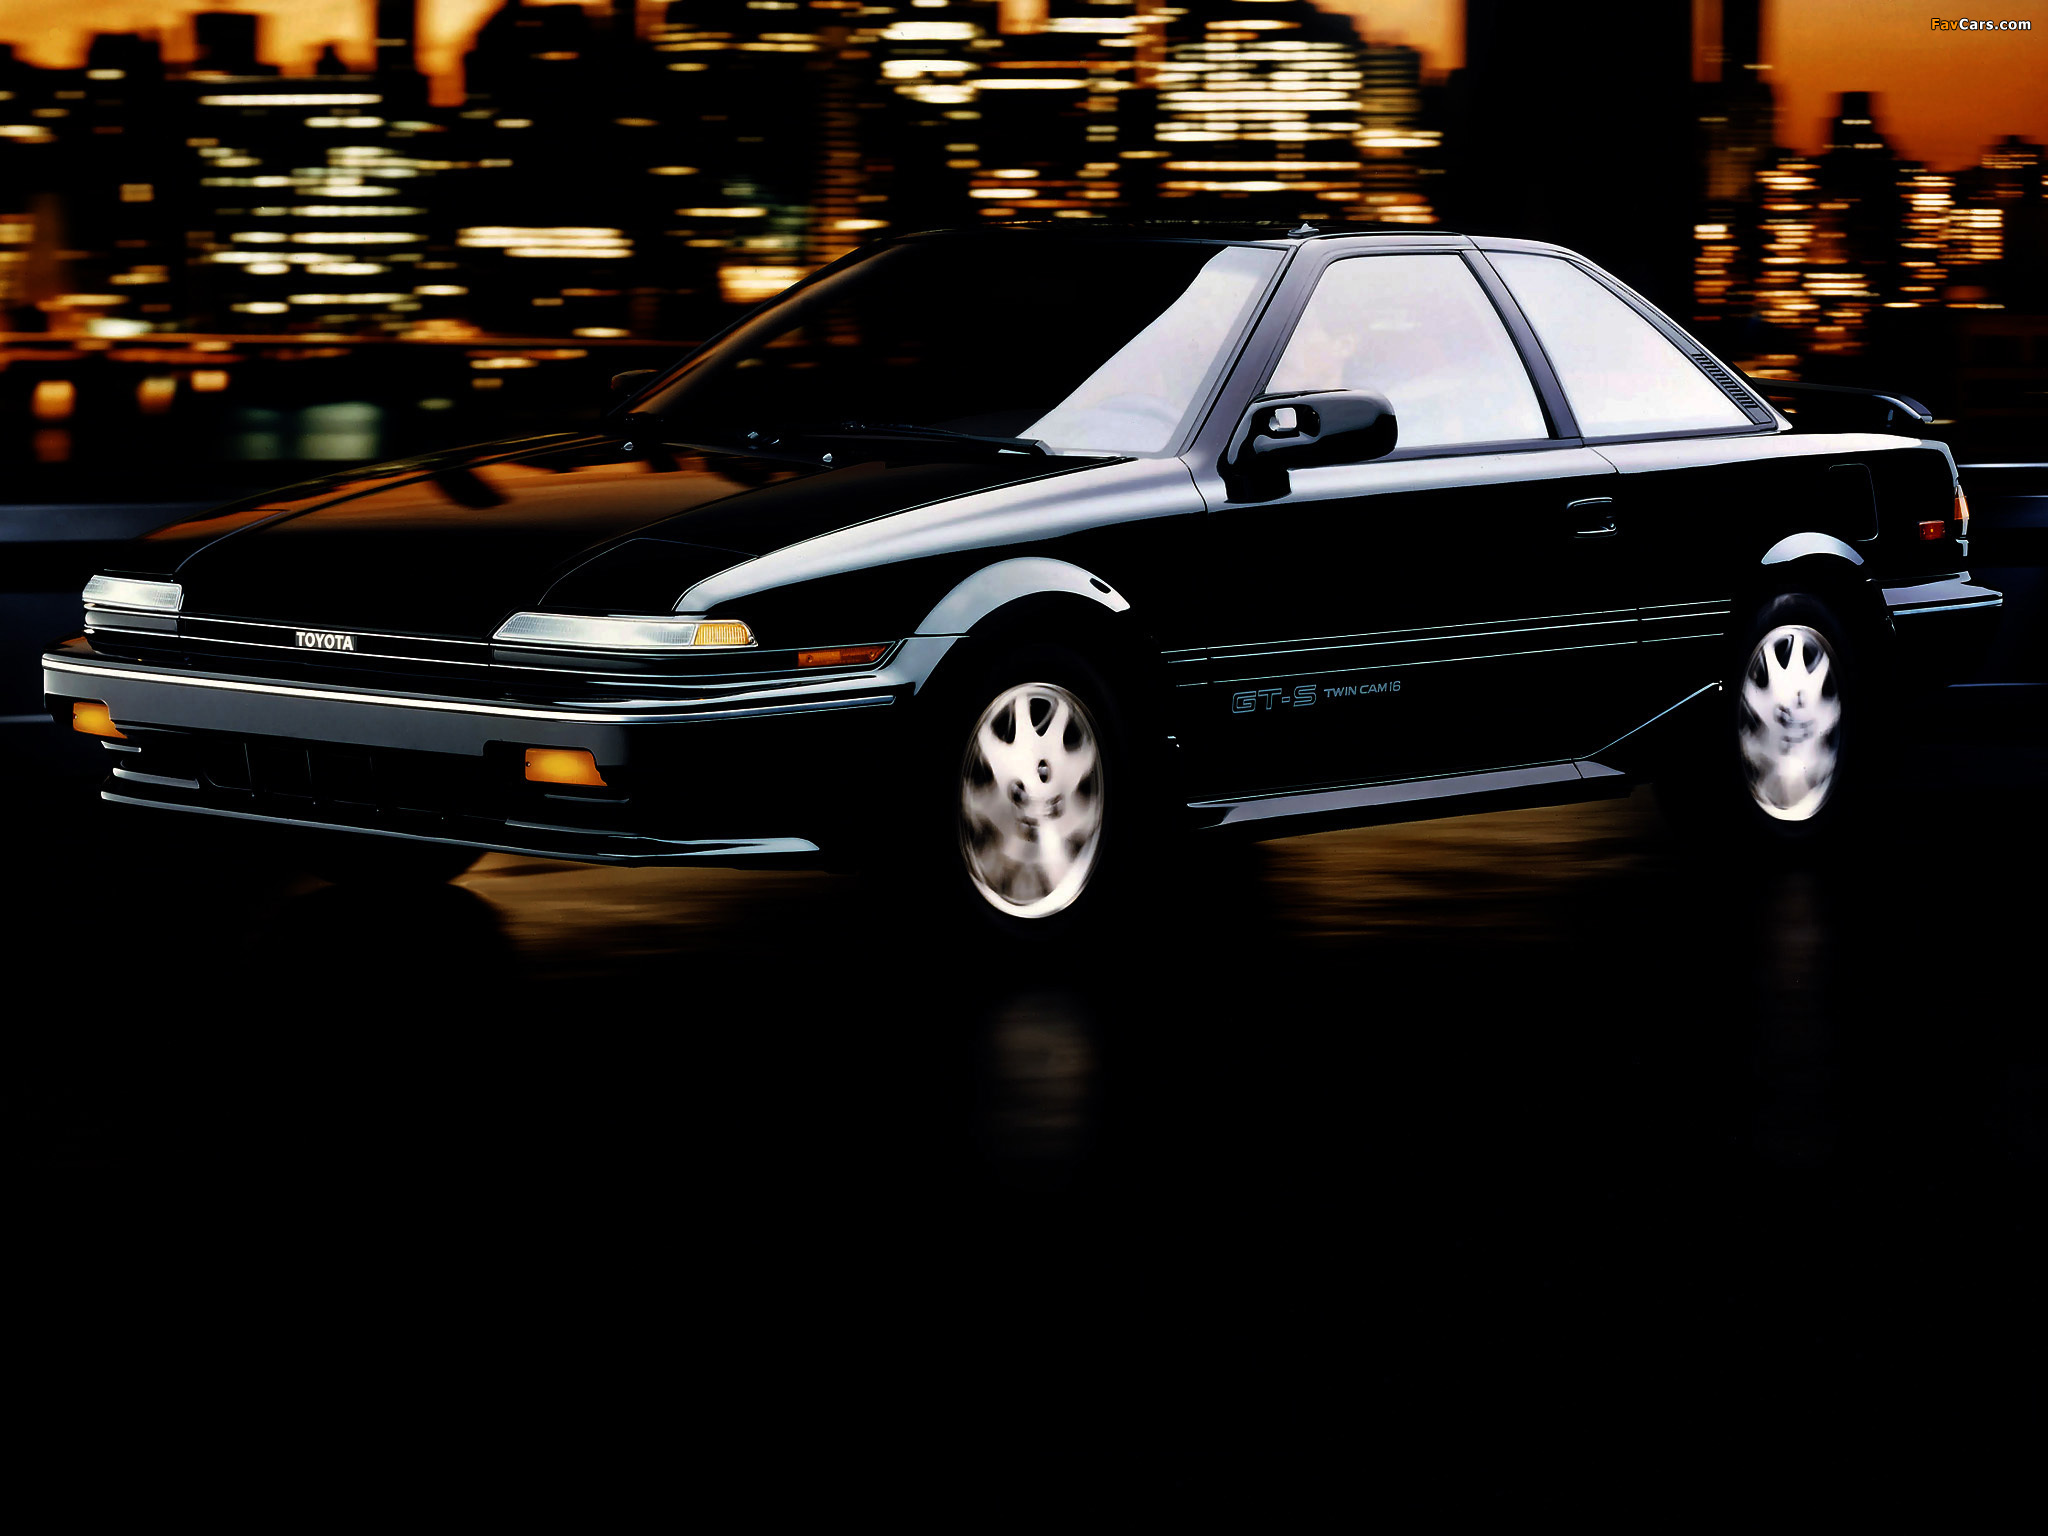 Toyota Corolla GT-S Sport Coupe (AE92) 1988–91 wallpapers (2048x1536) .